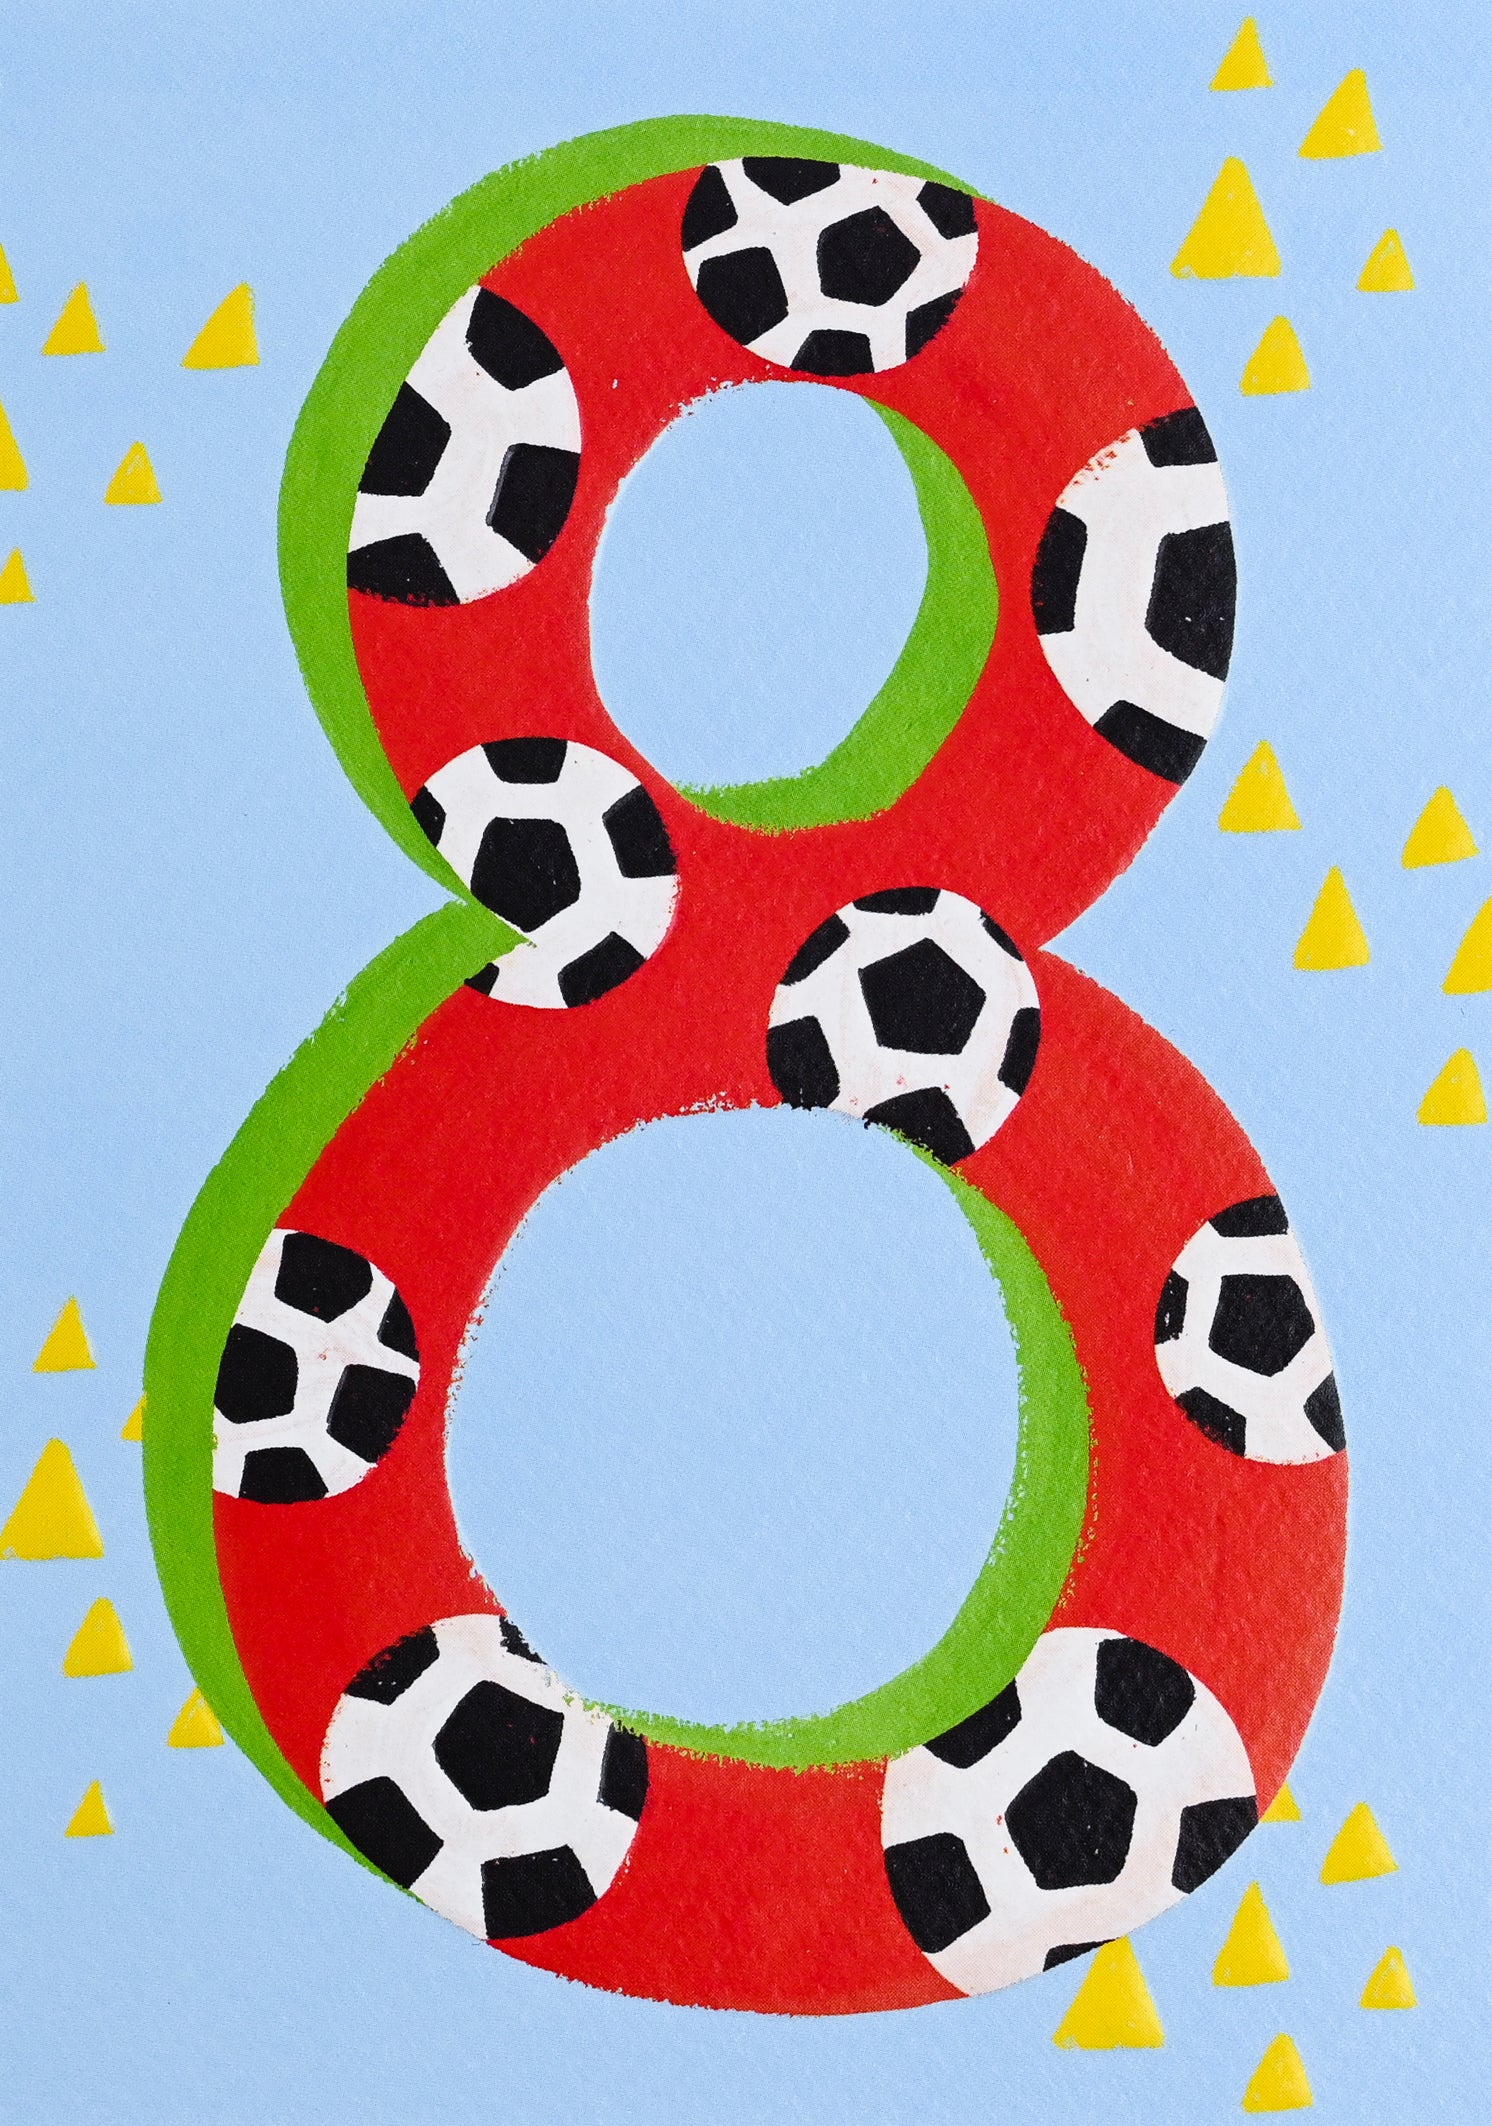 Iconic Red Football 8 Birthday Card from Penny Black